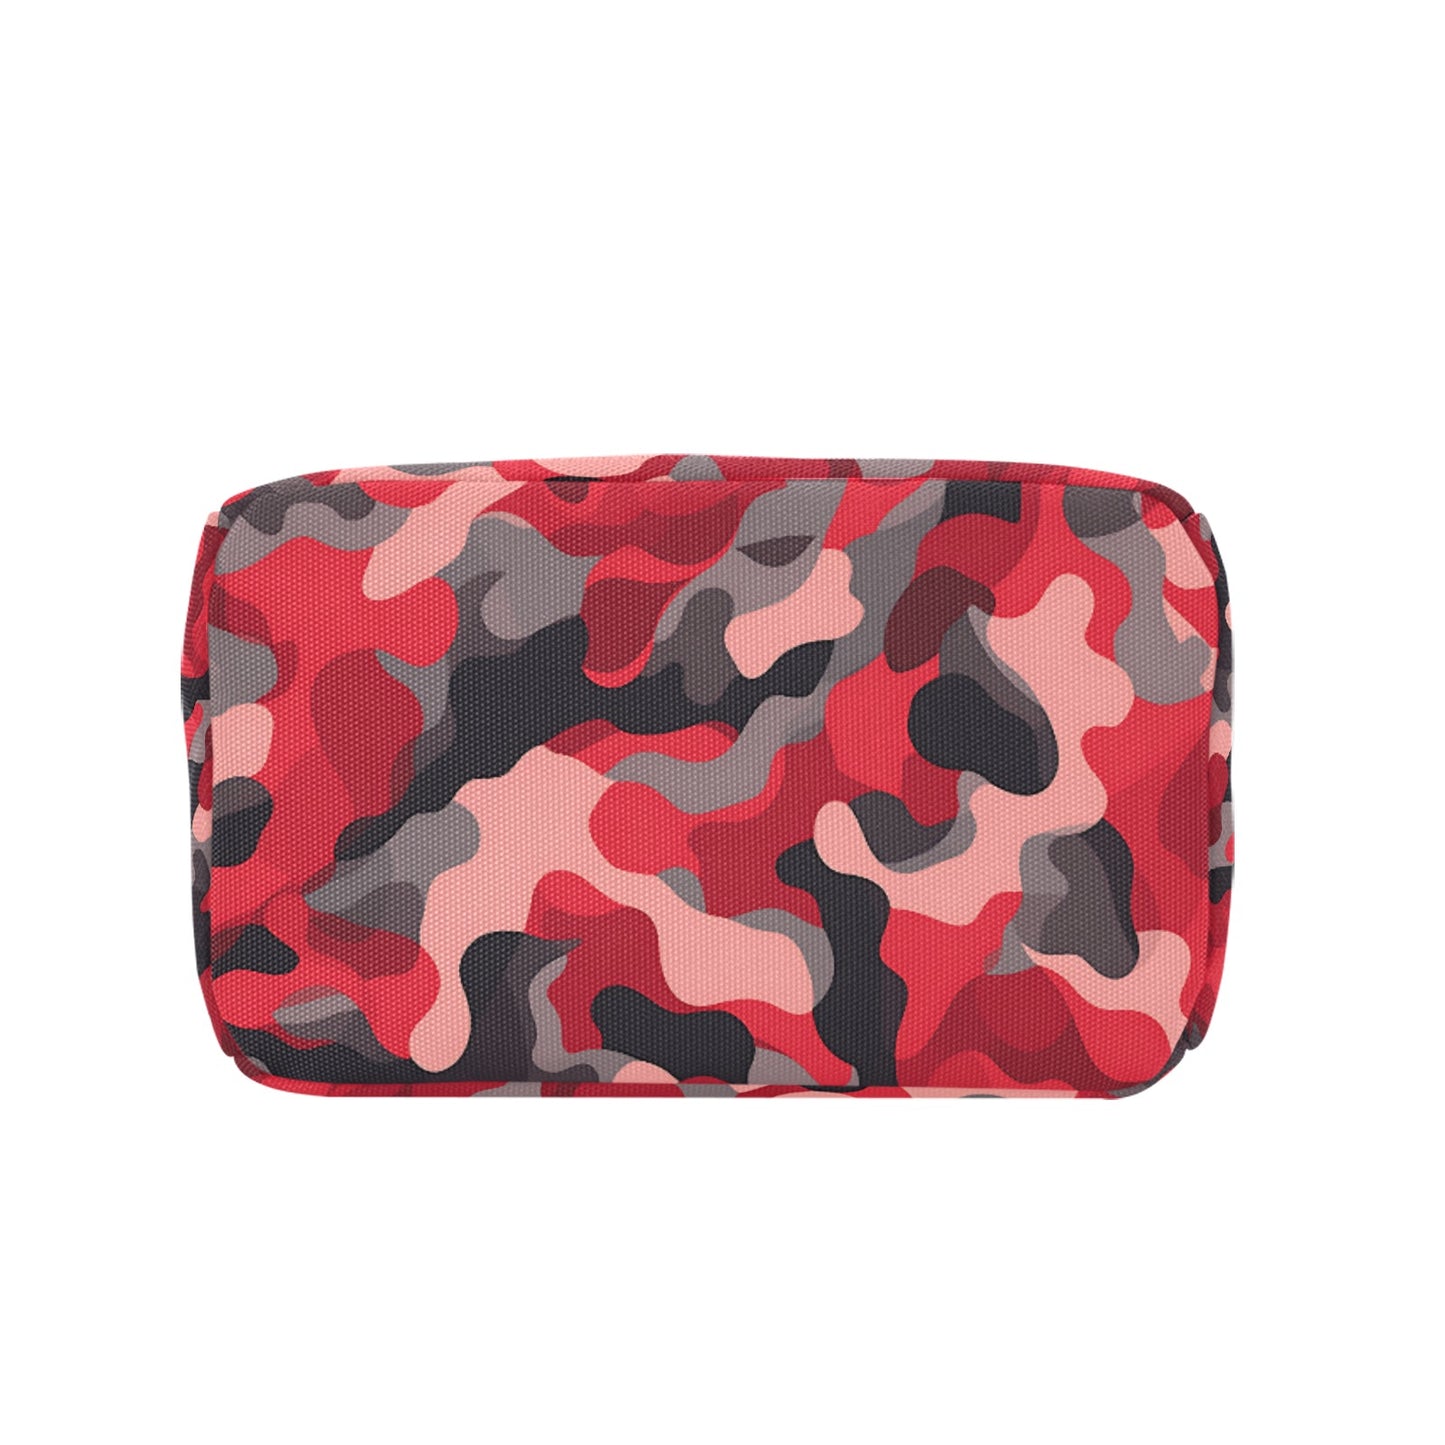 Insulated Zipper Lunch Bag- Red Camouflage